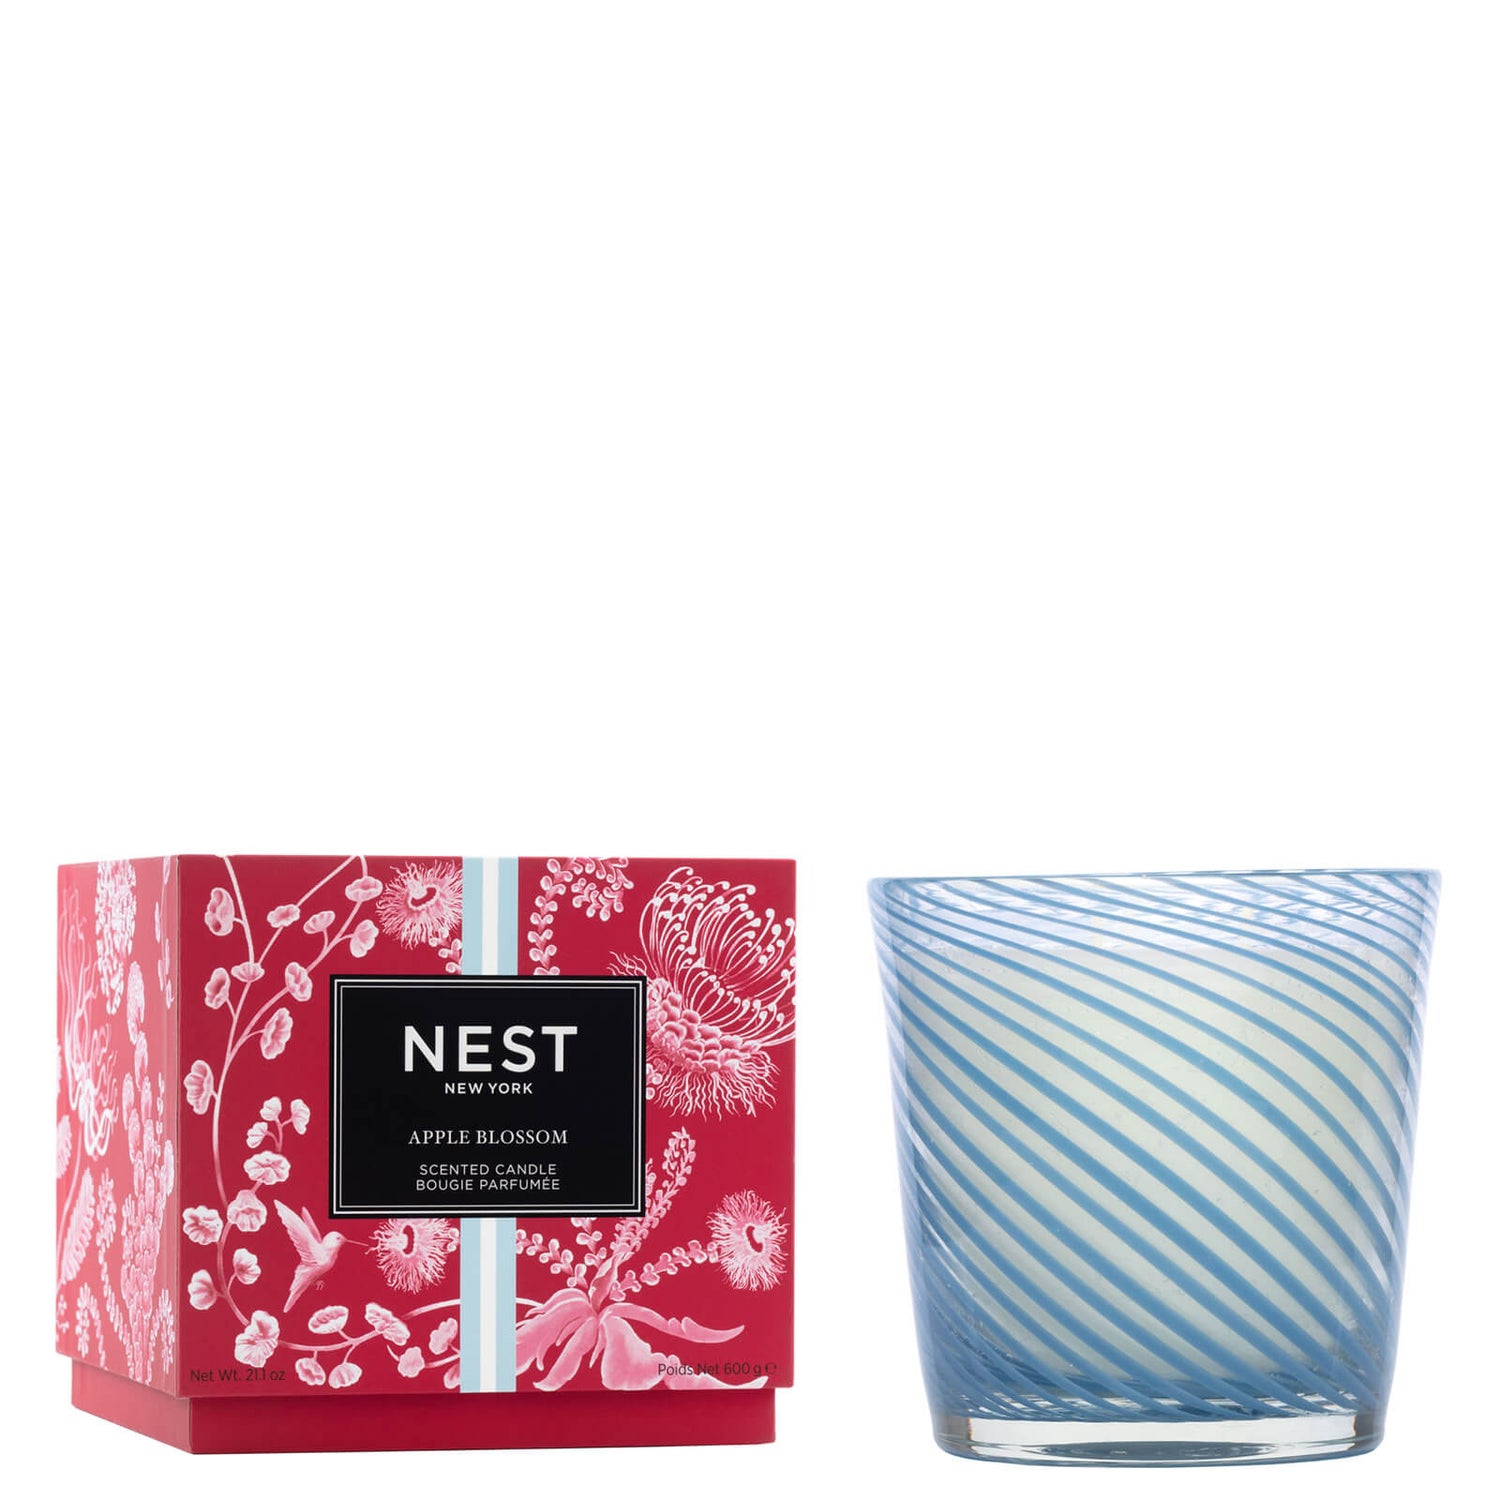 NEST Fragrances Apple Blossom Specialty 3-Wick Candle 600g